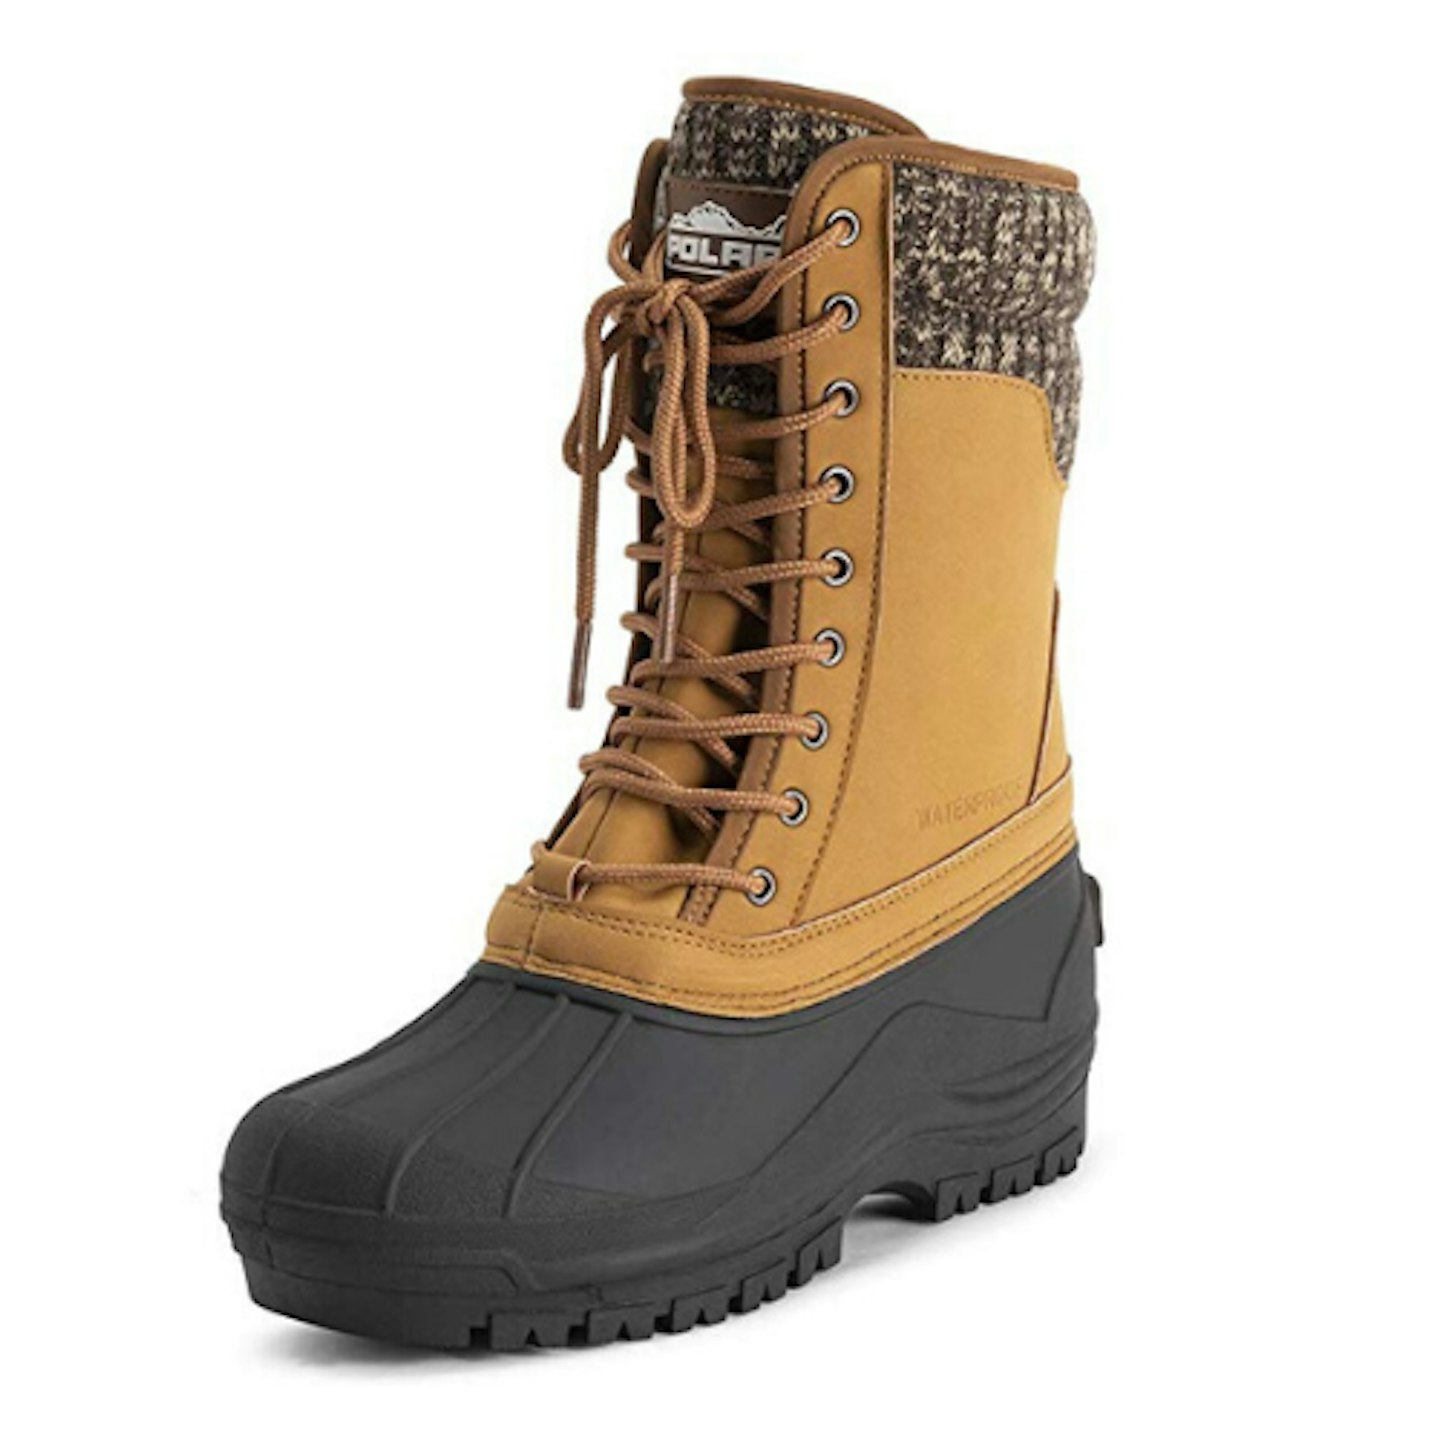 Polar Womens Lace Up Waterproof Duck Boots